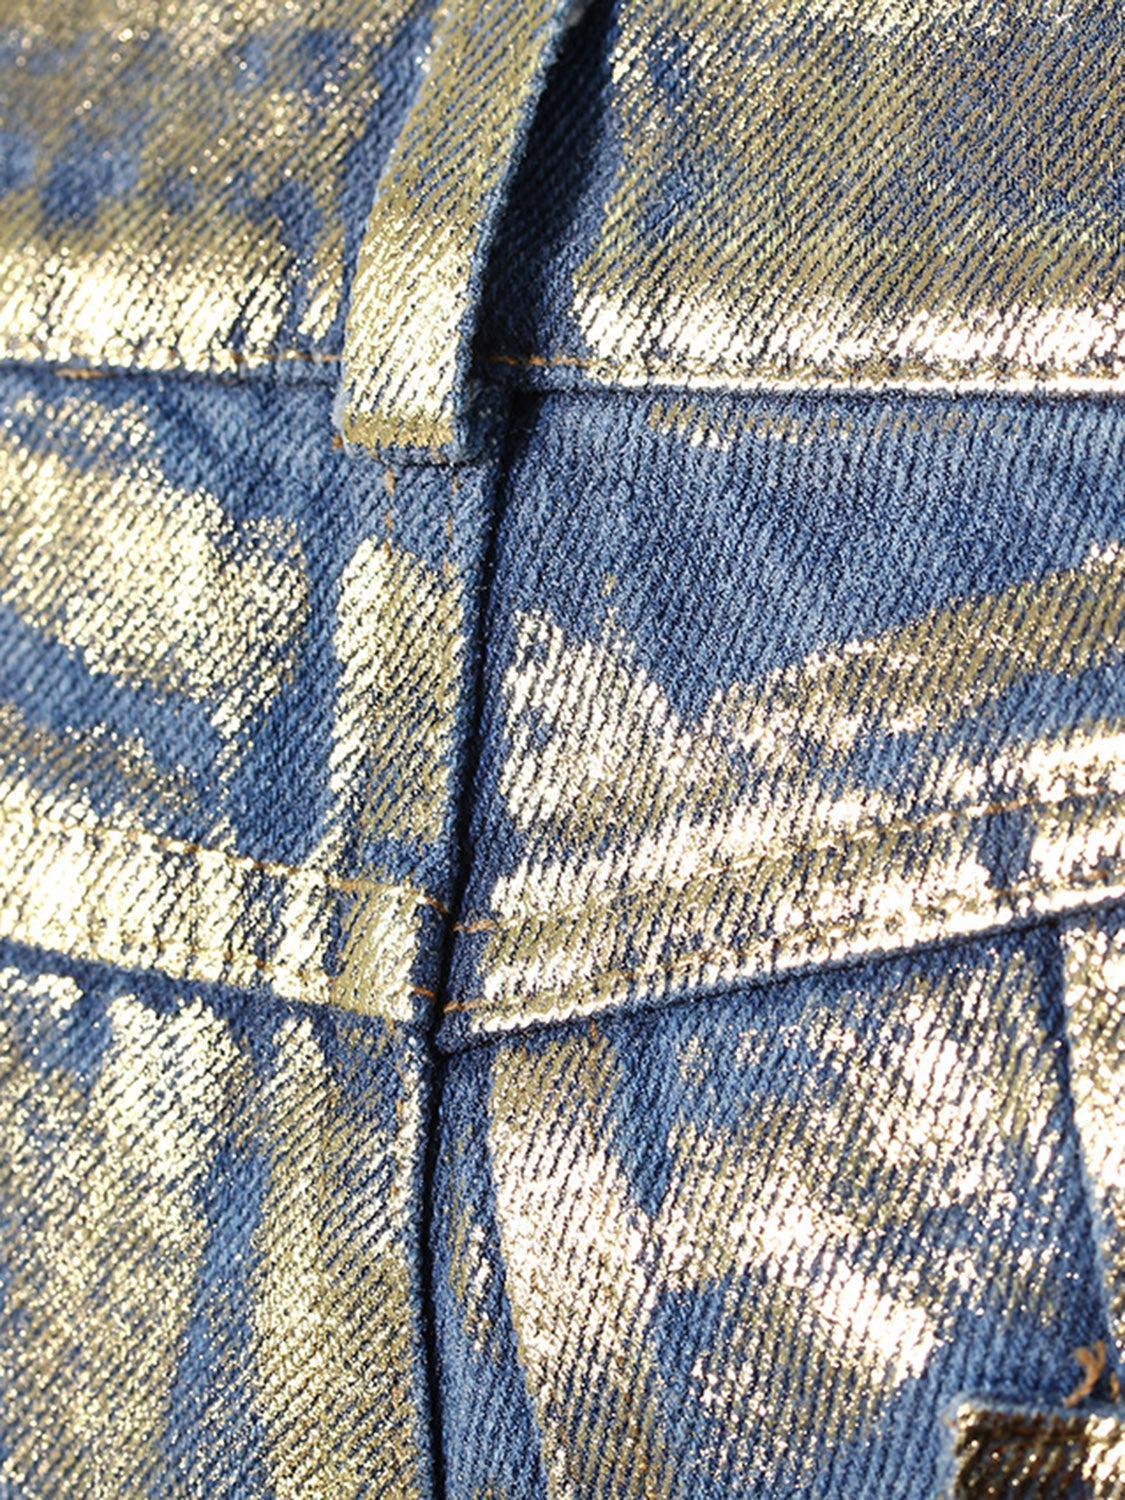 a close up of a pocket on a pair of jeans